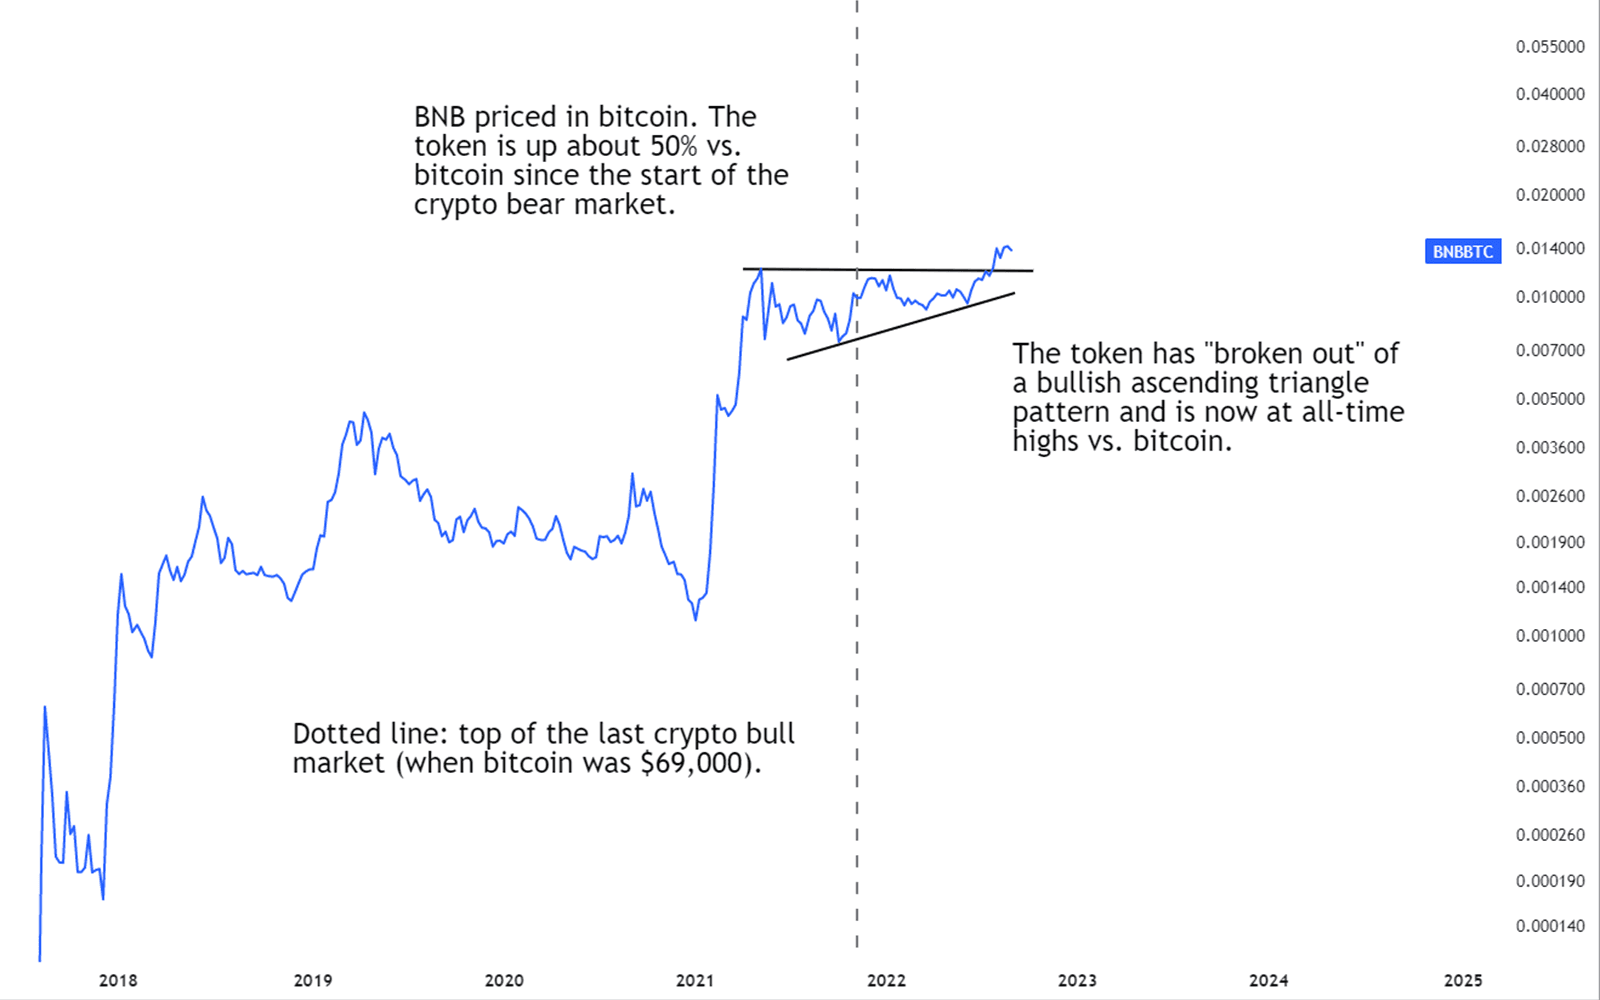 BNB priced in bitcoin. Chart drawn with TradingView.